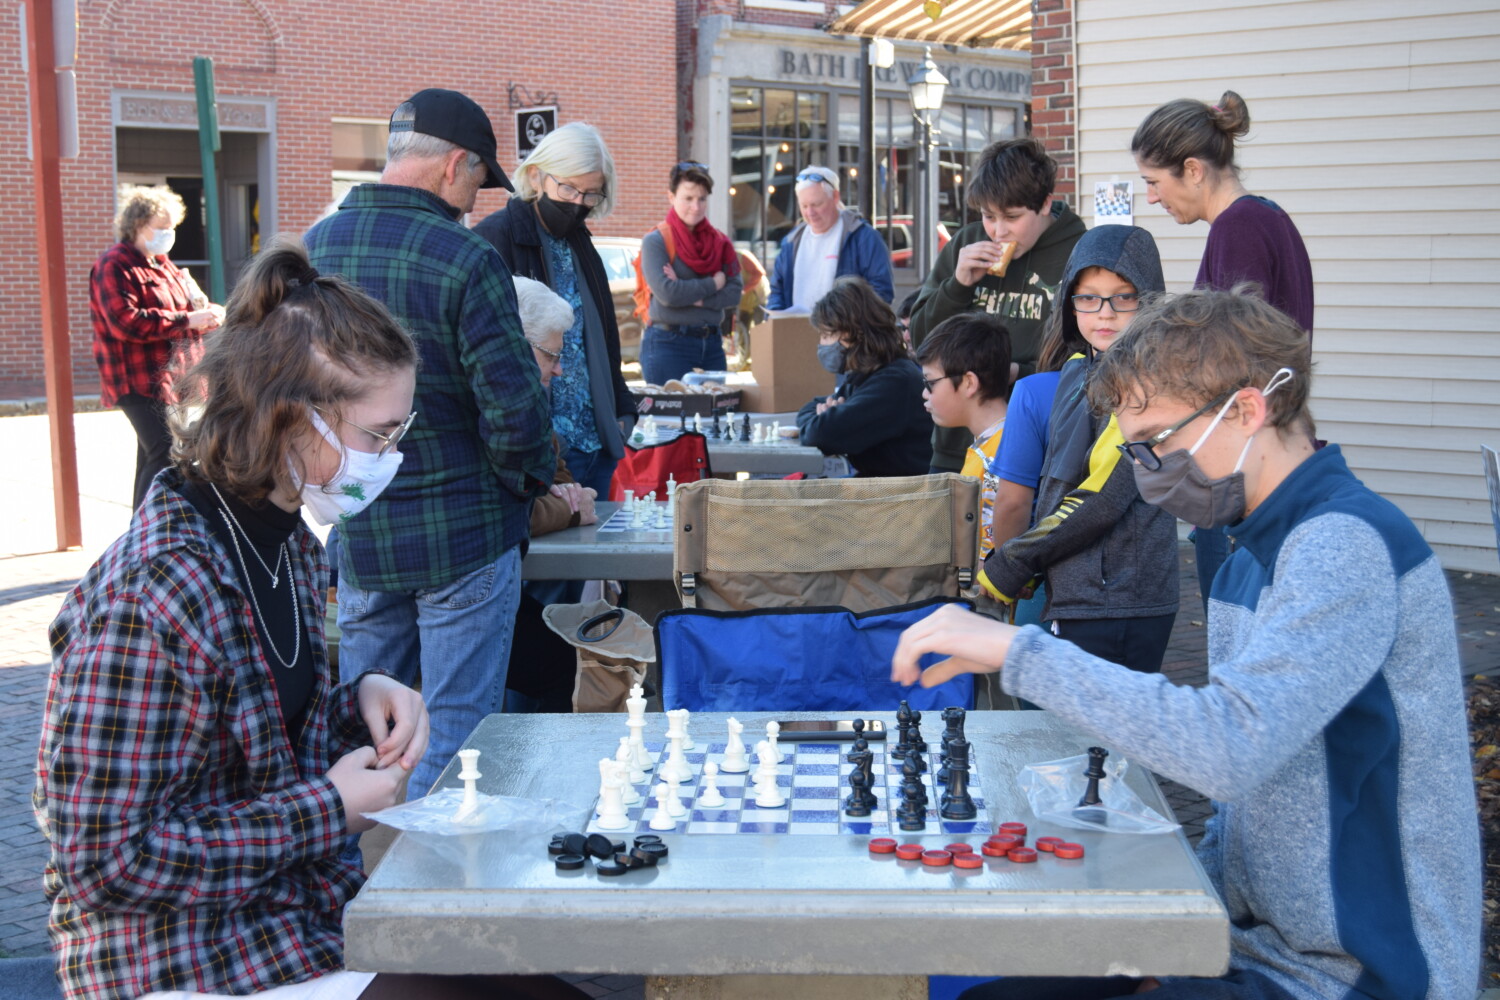 Chess master brings message to Quad-Cities